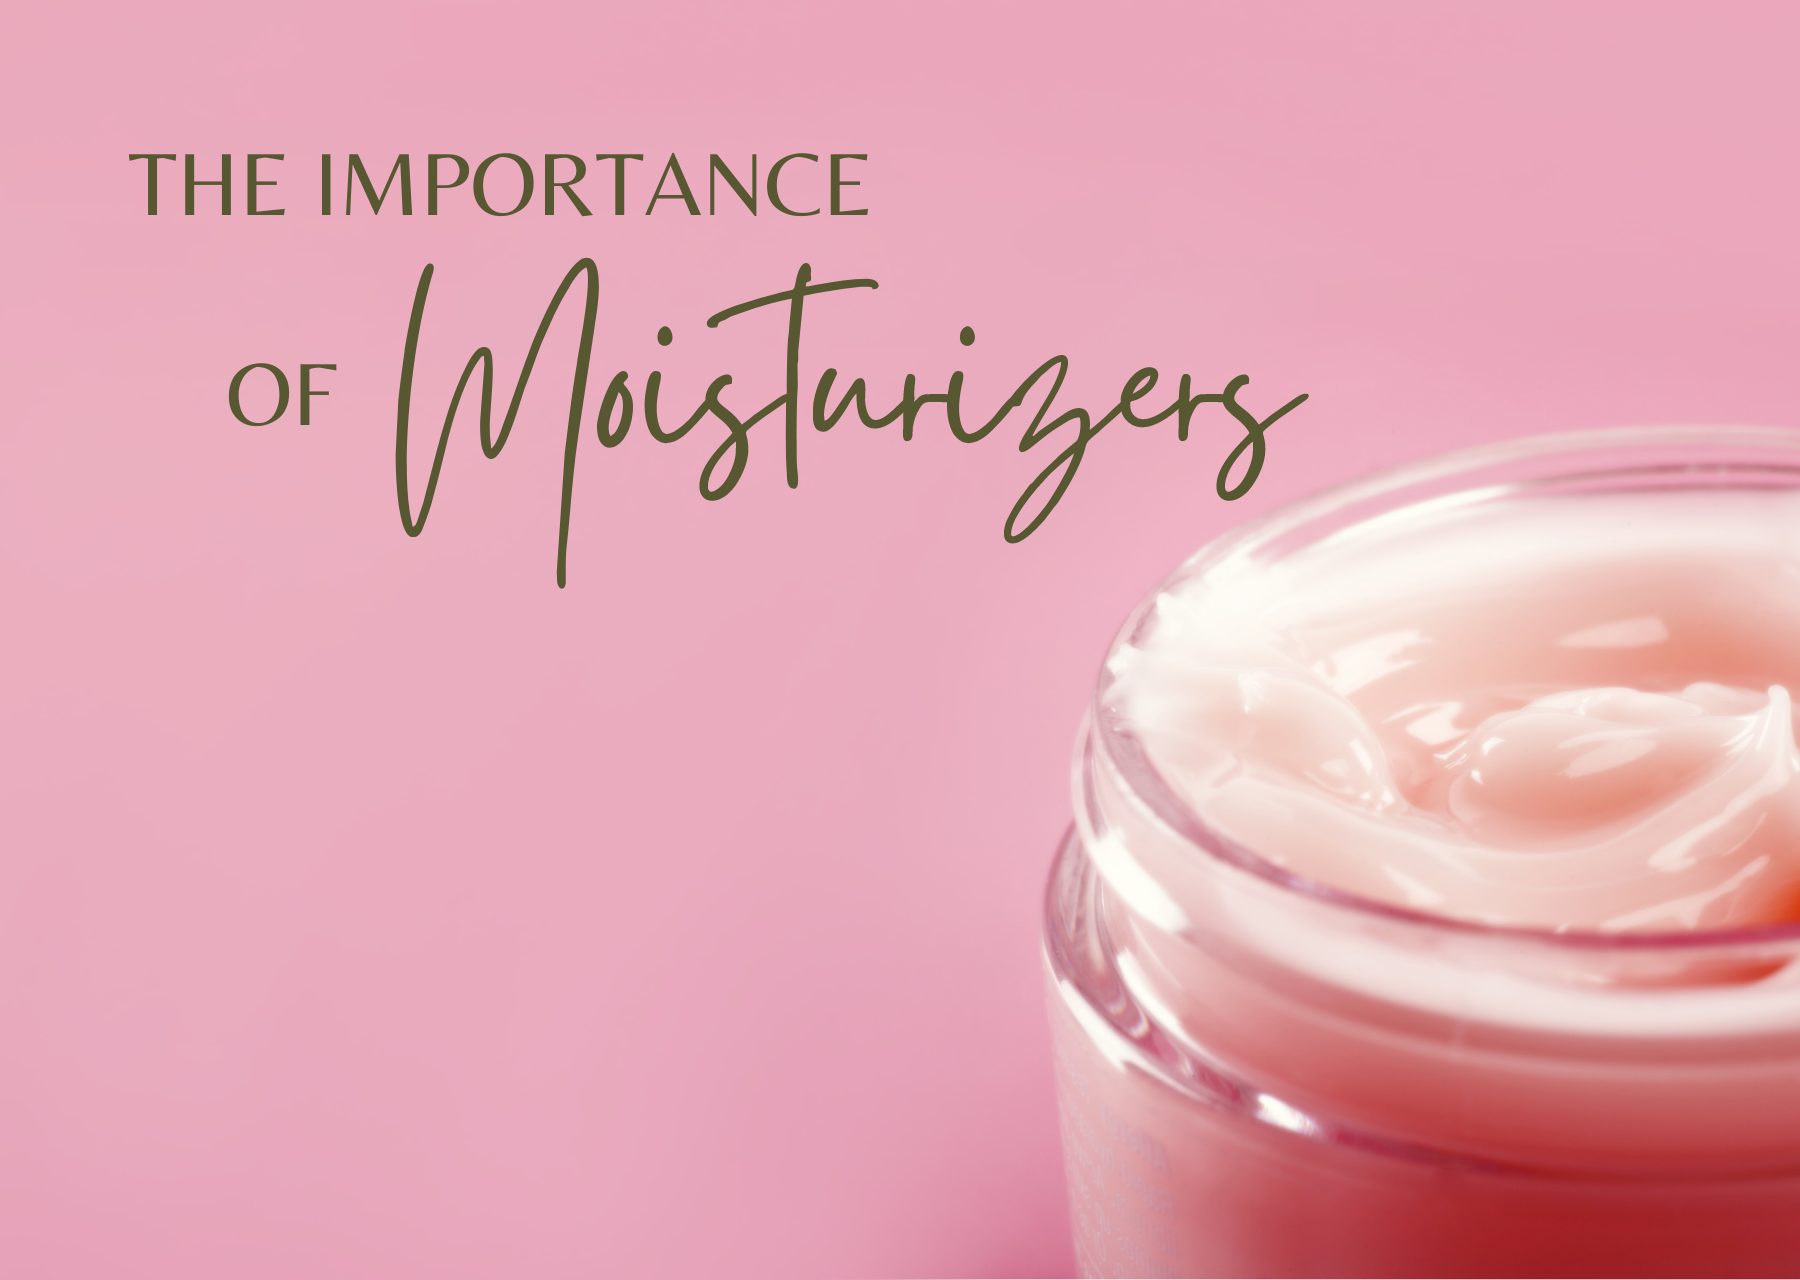 The importance of moisturizers